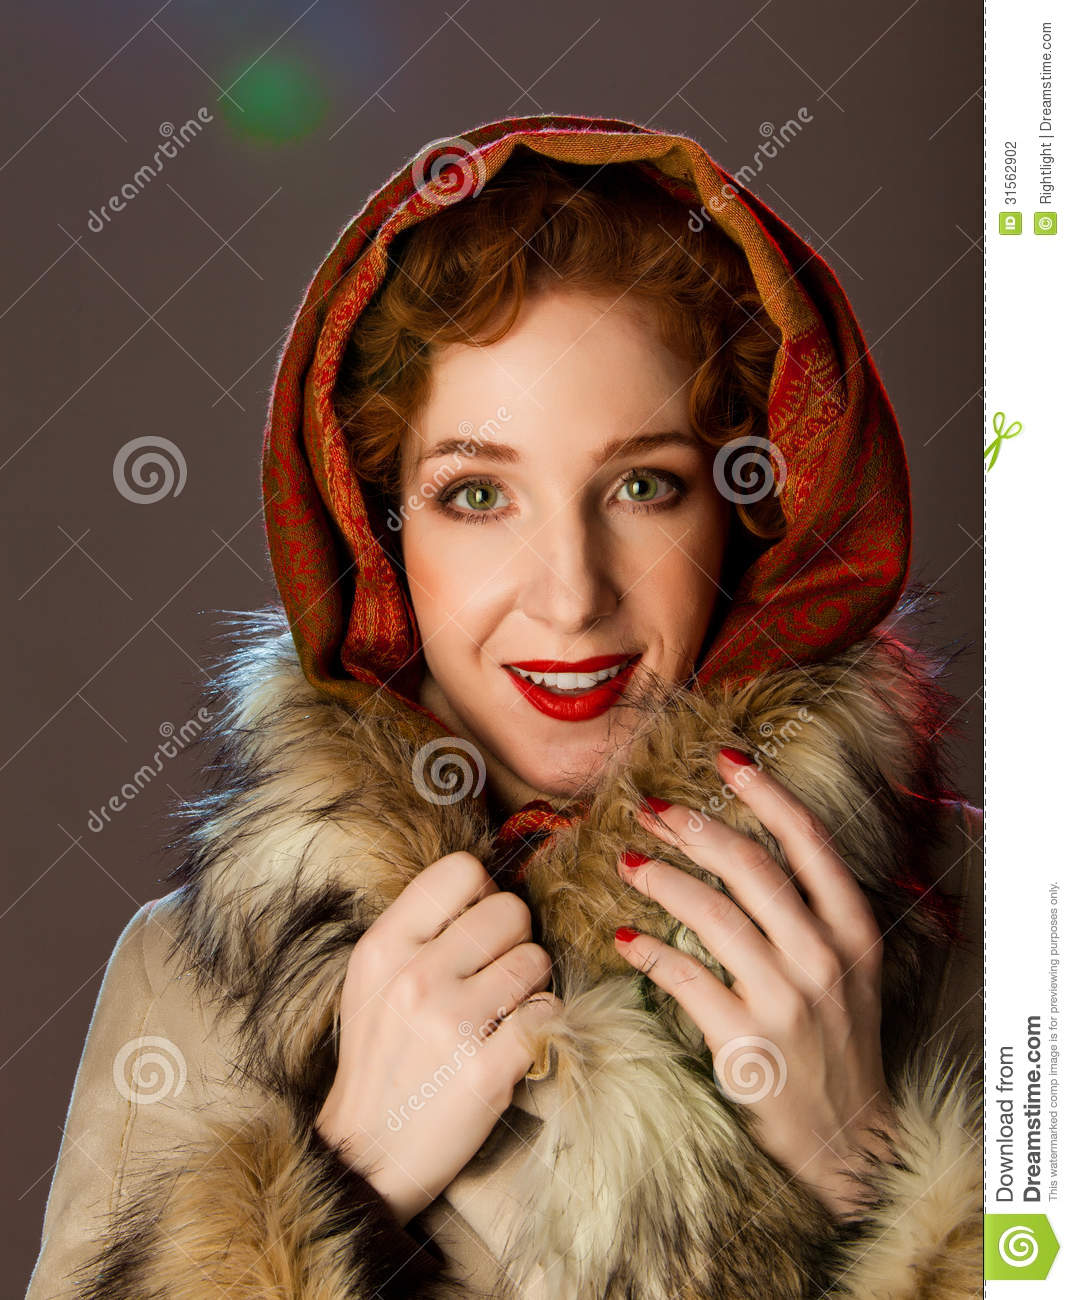 Redhaired Woman With Headscarf And Fur Coat